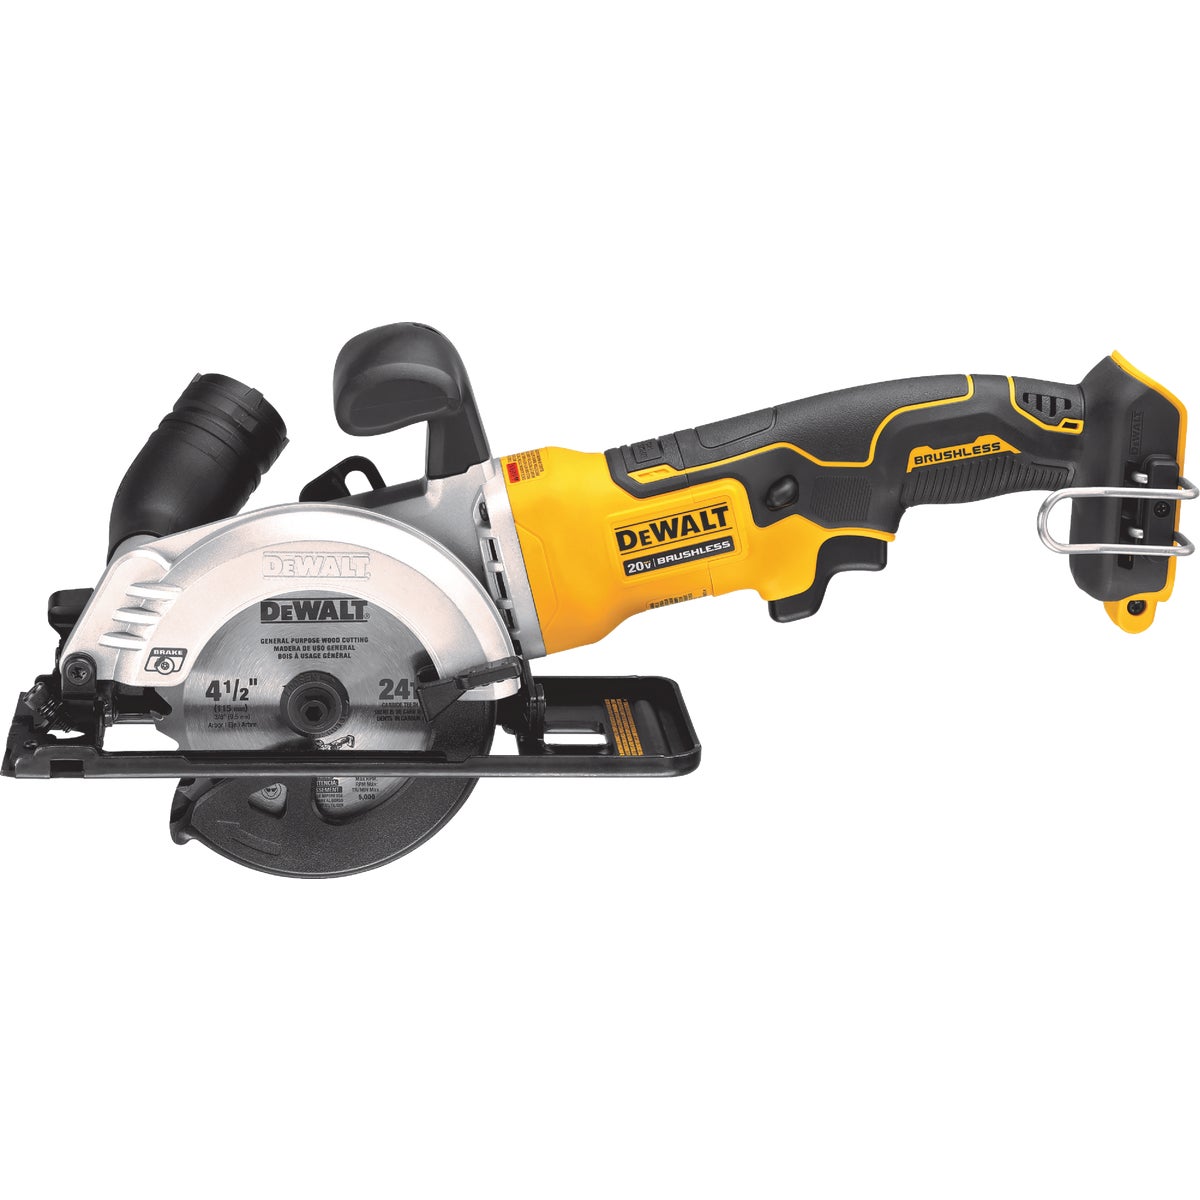 DEWALT ATOMIC 20-Volt MAX Lithium-Ion Brushless 4-1/2 In. Cordless Circular Saw (Tool Only)